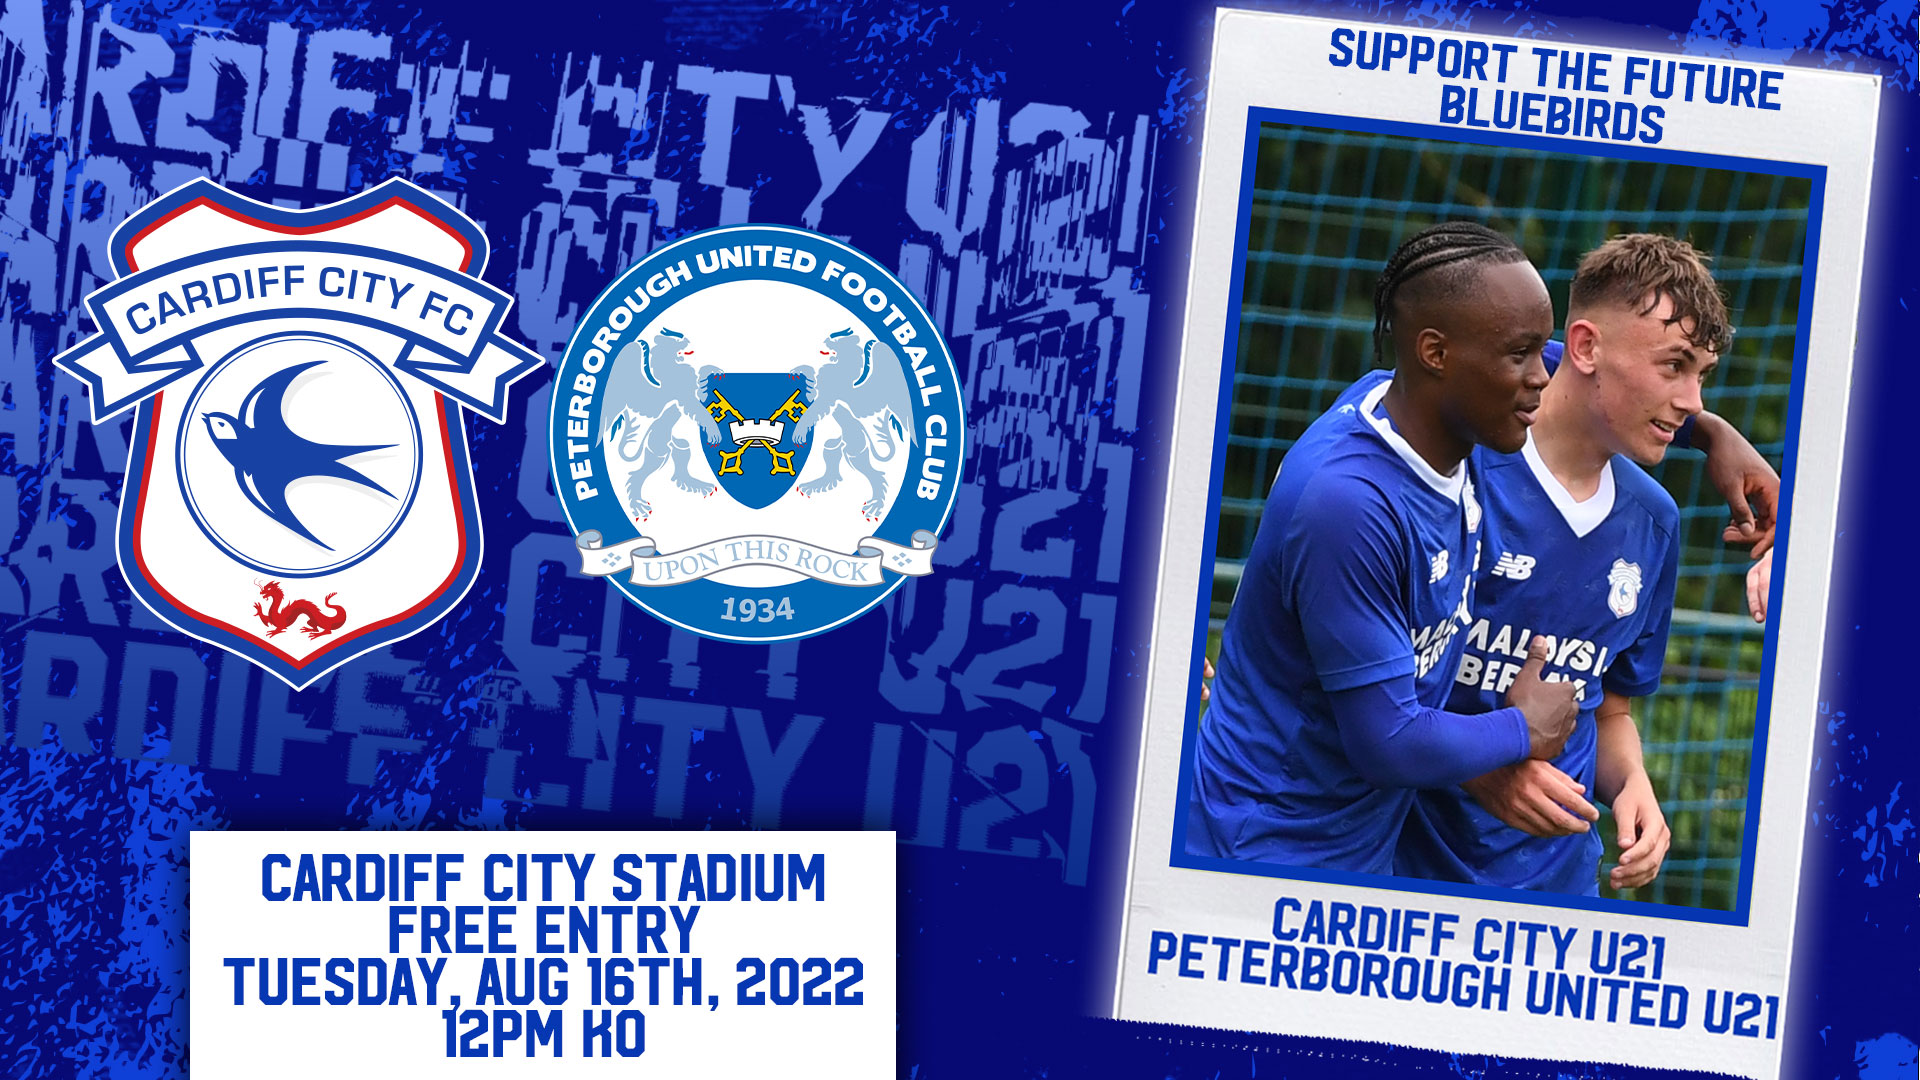 Watch the young Bluebirds at CCS for free...